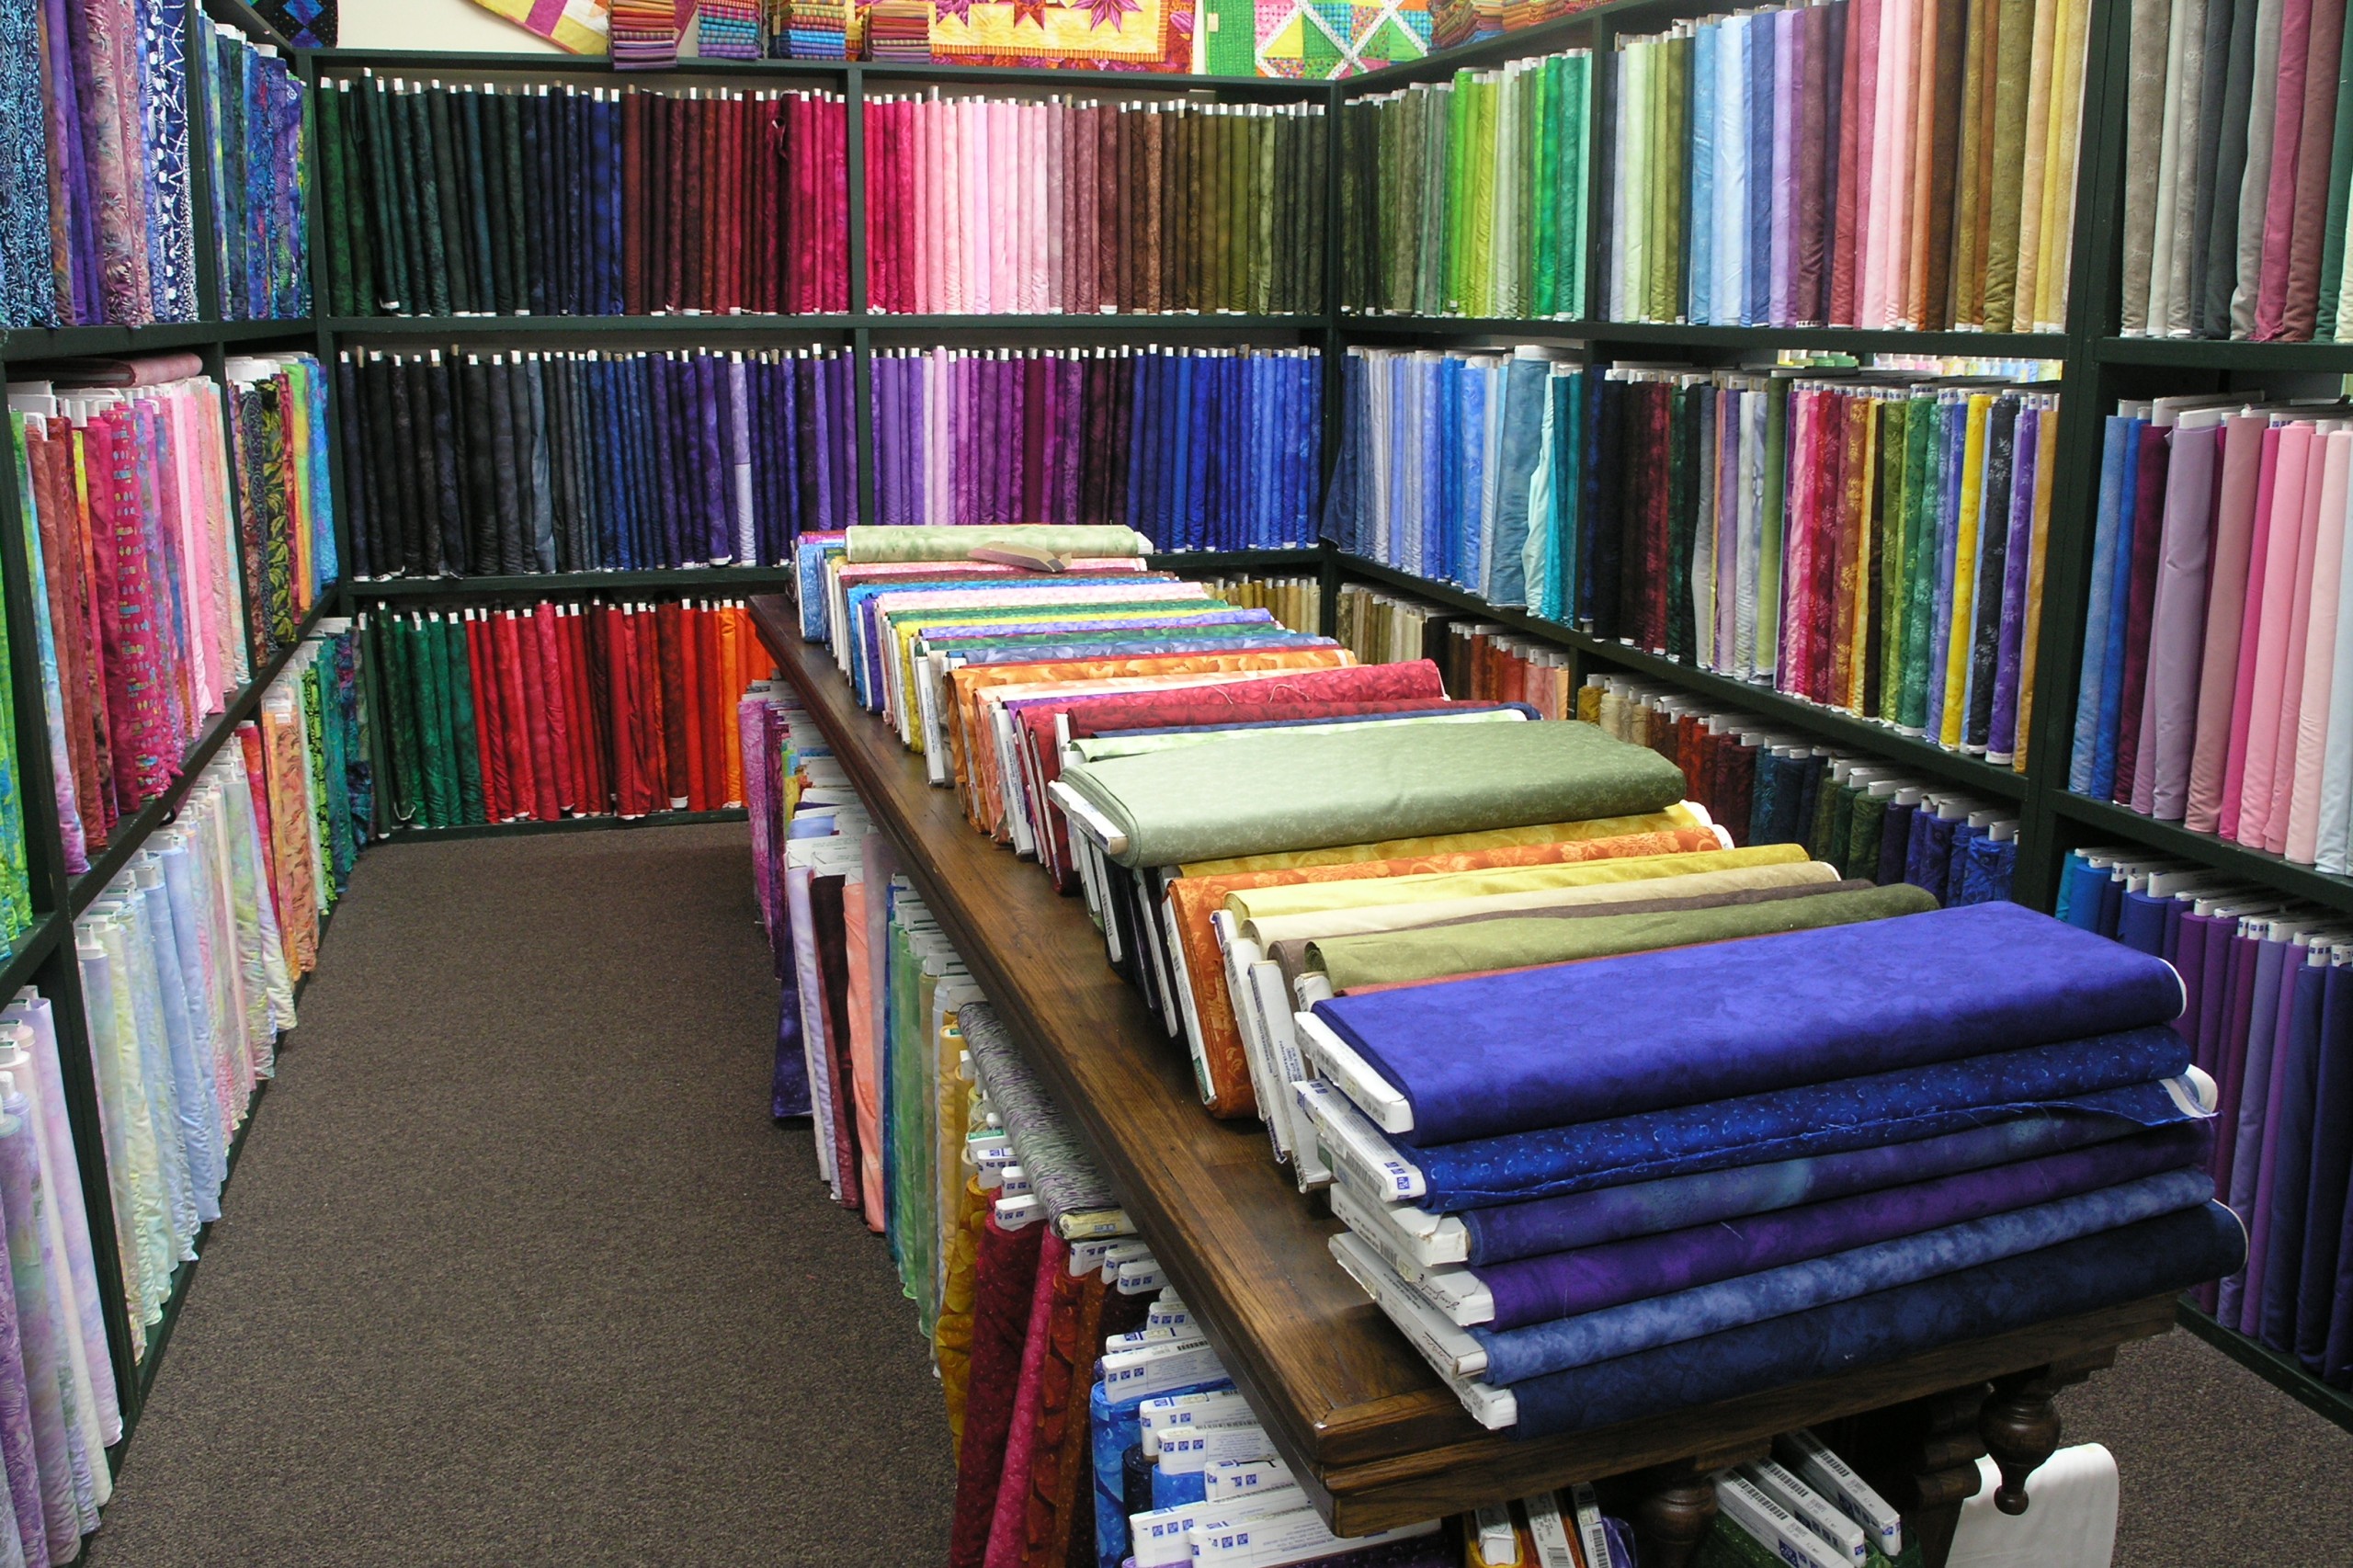 Lots of different colored fabric